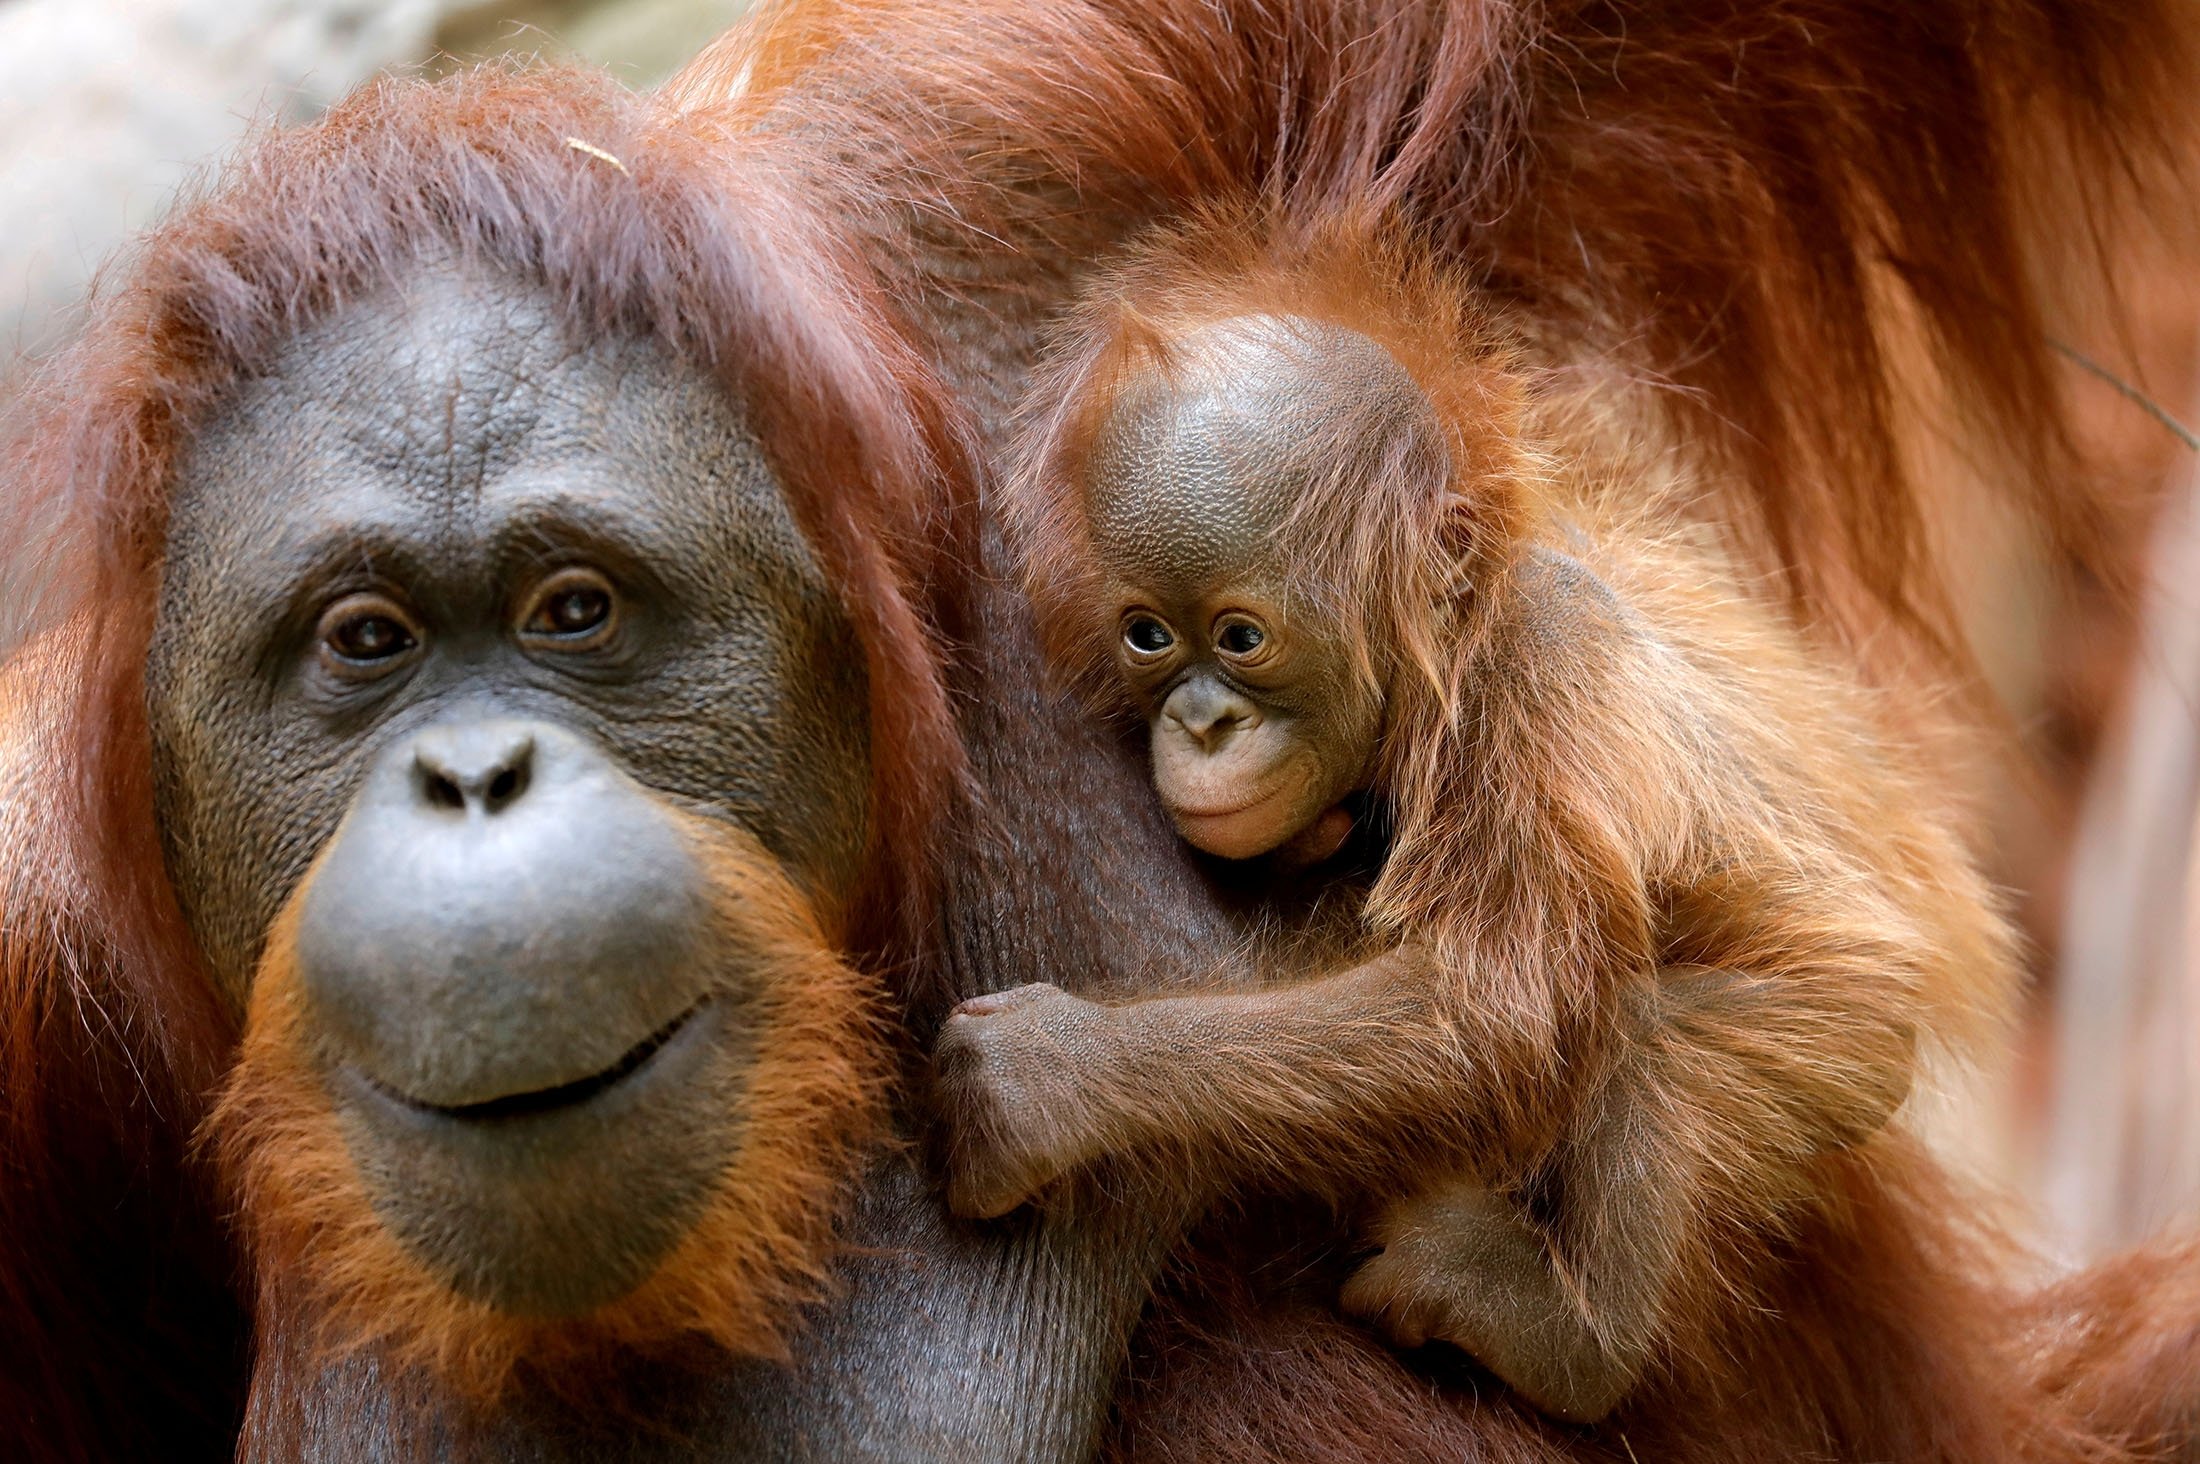 An eleven-day-old baby male Bornean orangutan holds onto his mother Suli at the Bioparc zoological park in Fuengirola, Spain, on Aug. 15, 2021. (Reuters Photo)